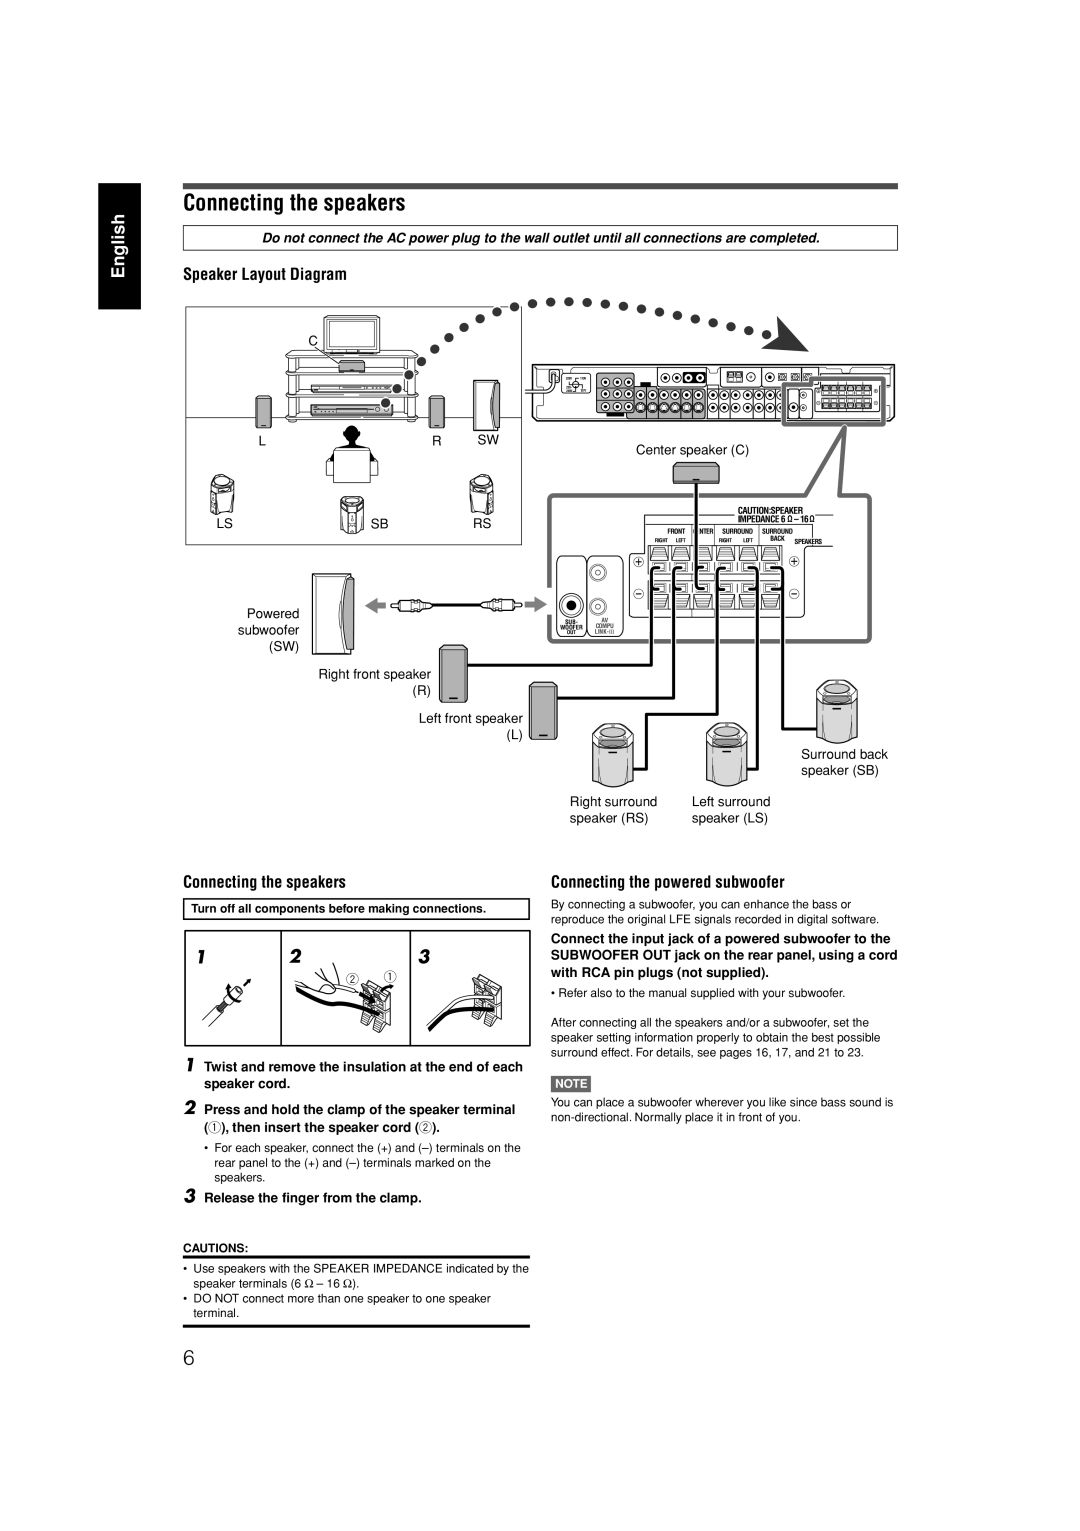 JVC RX-F31S manual Connecting the speakers, English, Speaker Layout Diagram, Connecting the powered subwoofer 